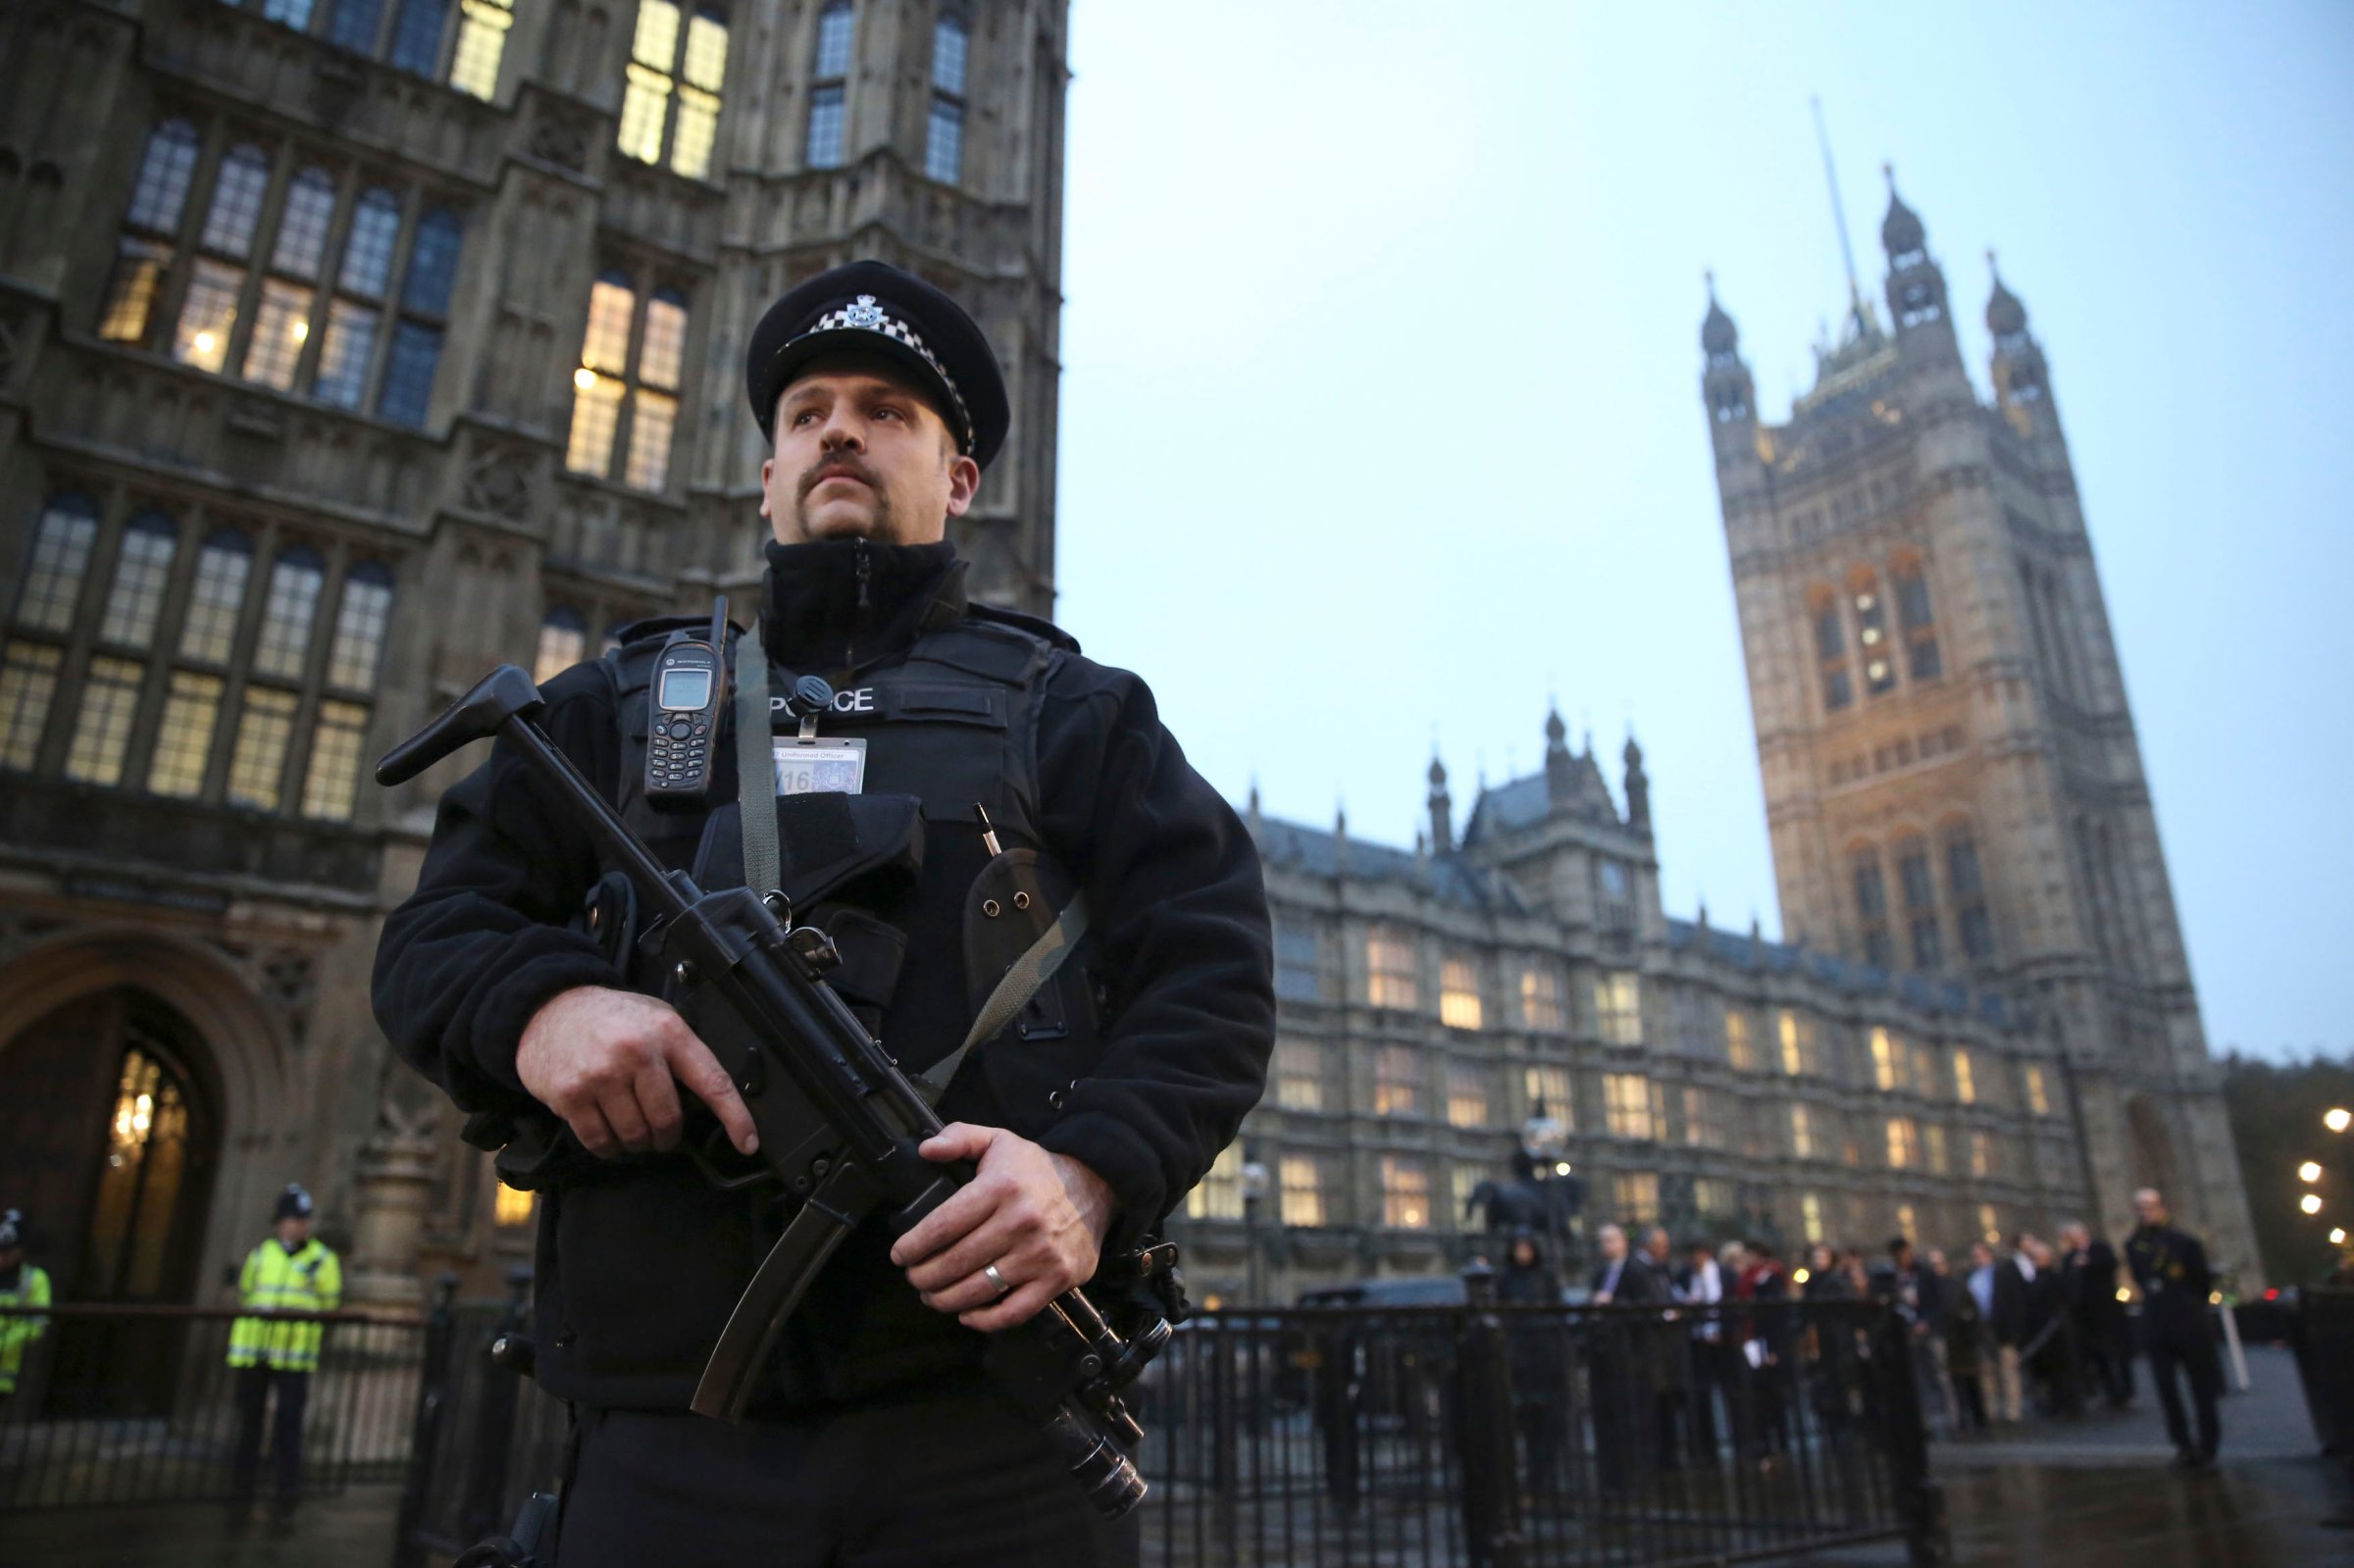 An armed police officer stands outside the Houses of Parliament, central London